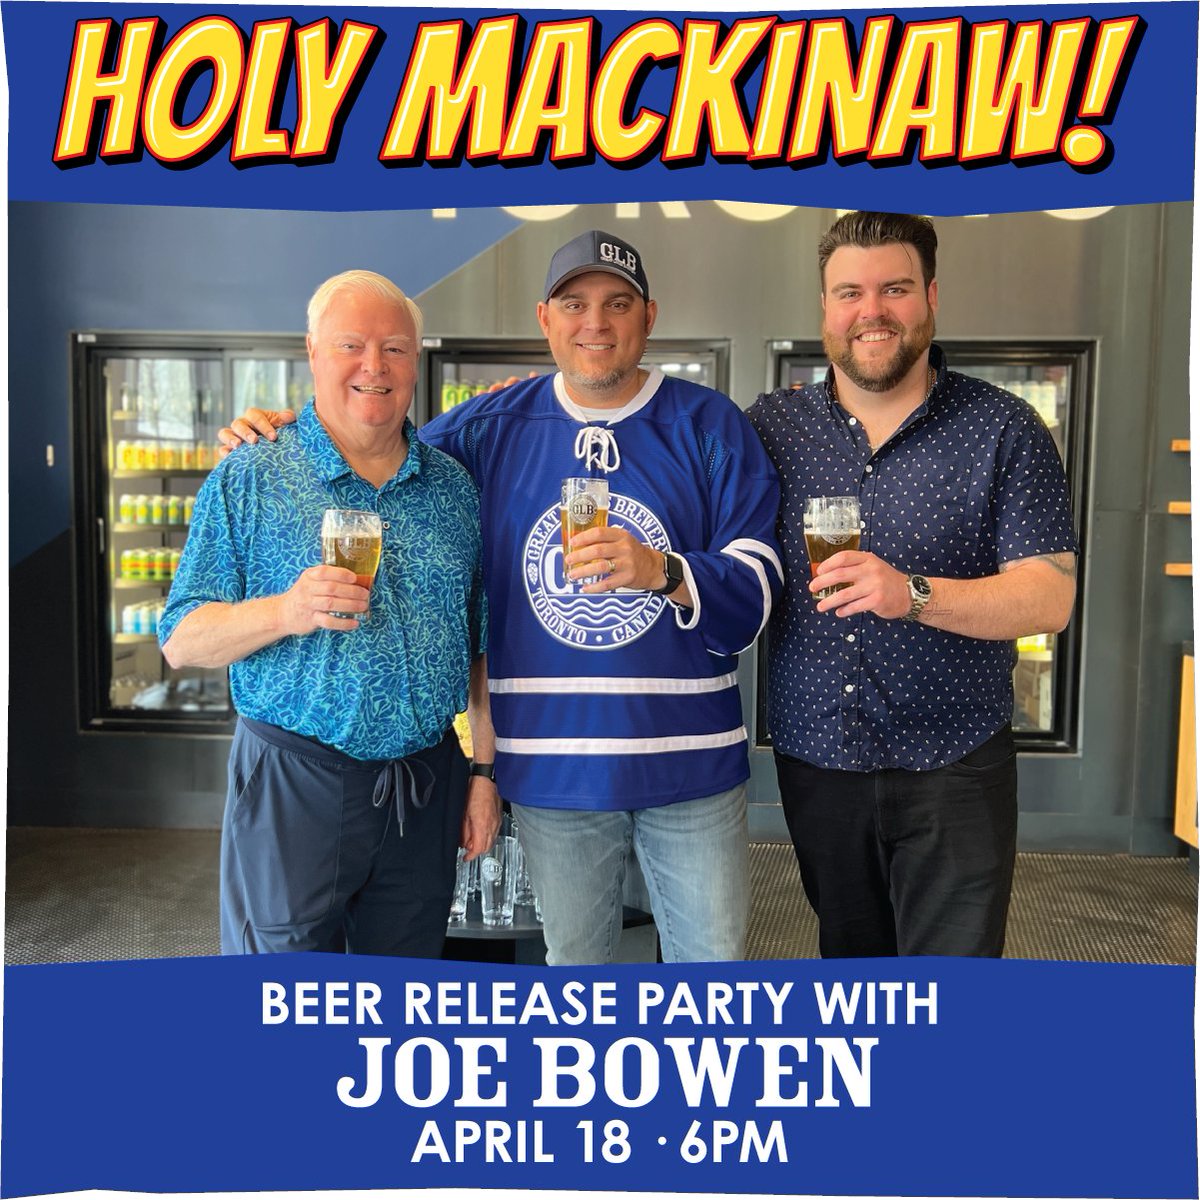 New Release (1 of 3)
HOLY MACKINAW!
First Line Lager
5.0% abv

$1 from every can will be donated to the SickKids Foundation.

Get this beer and meet Joe Bowen and Sean Bowen at our Release Party at the GLB Brewpub tomorrow! It will also be available at the Brewery and Online